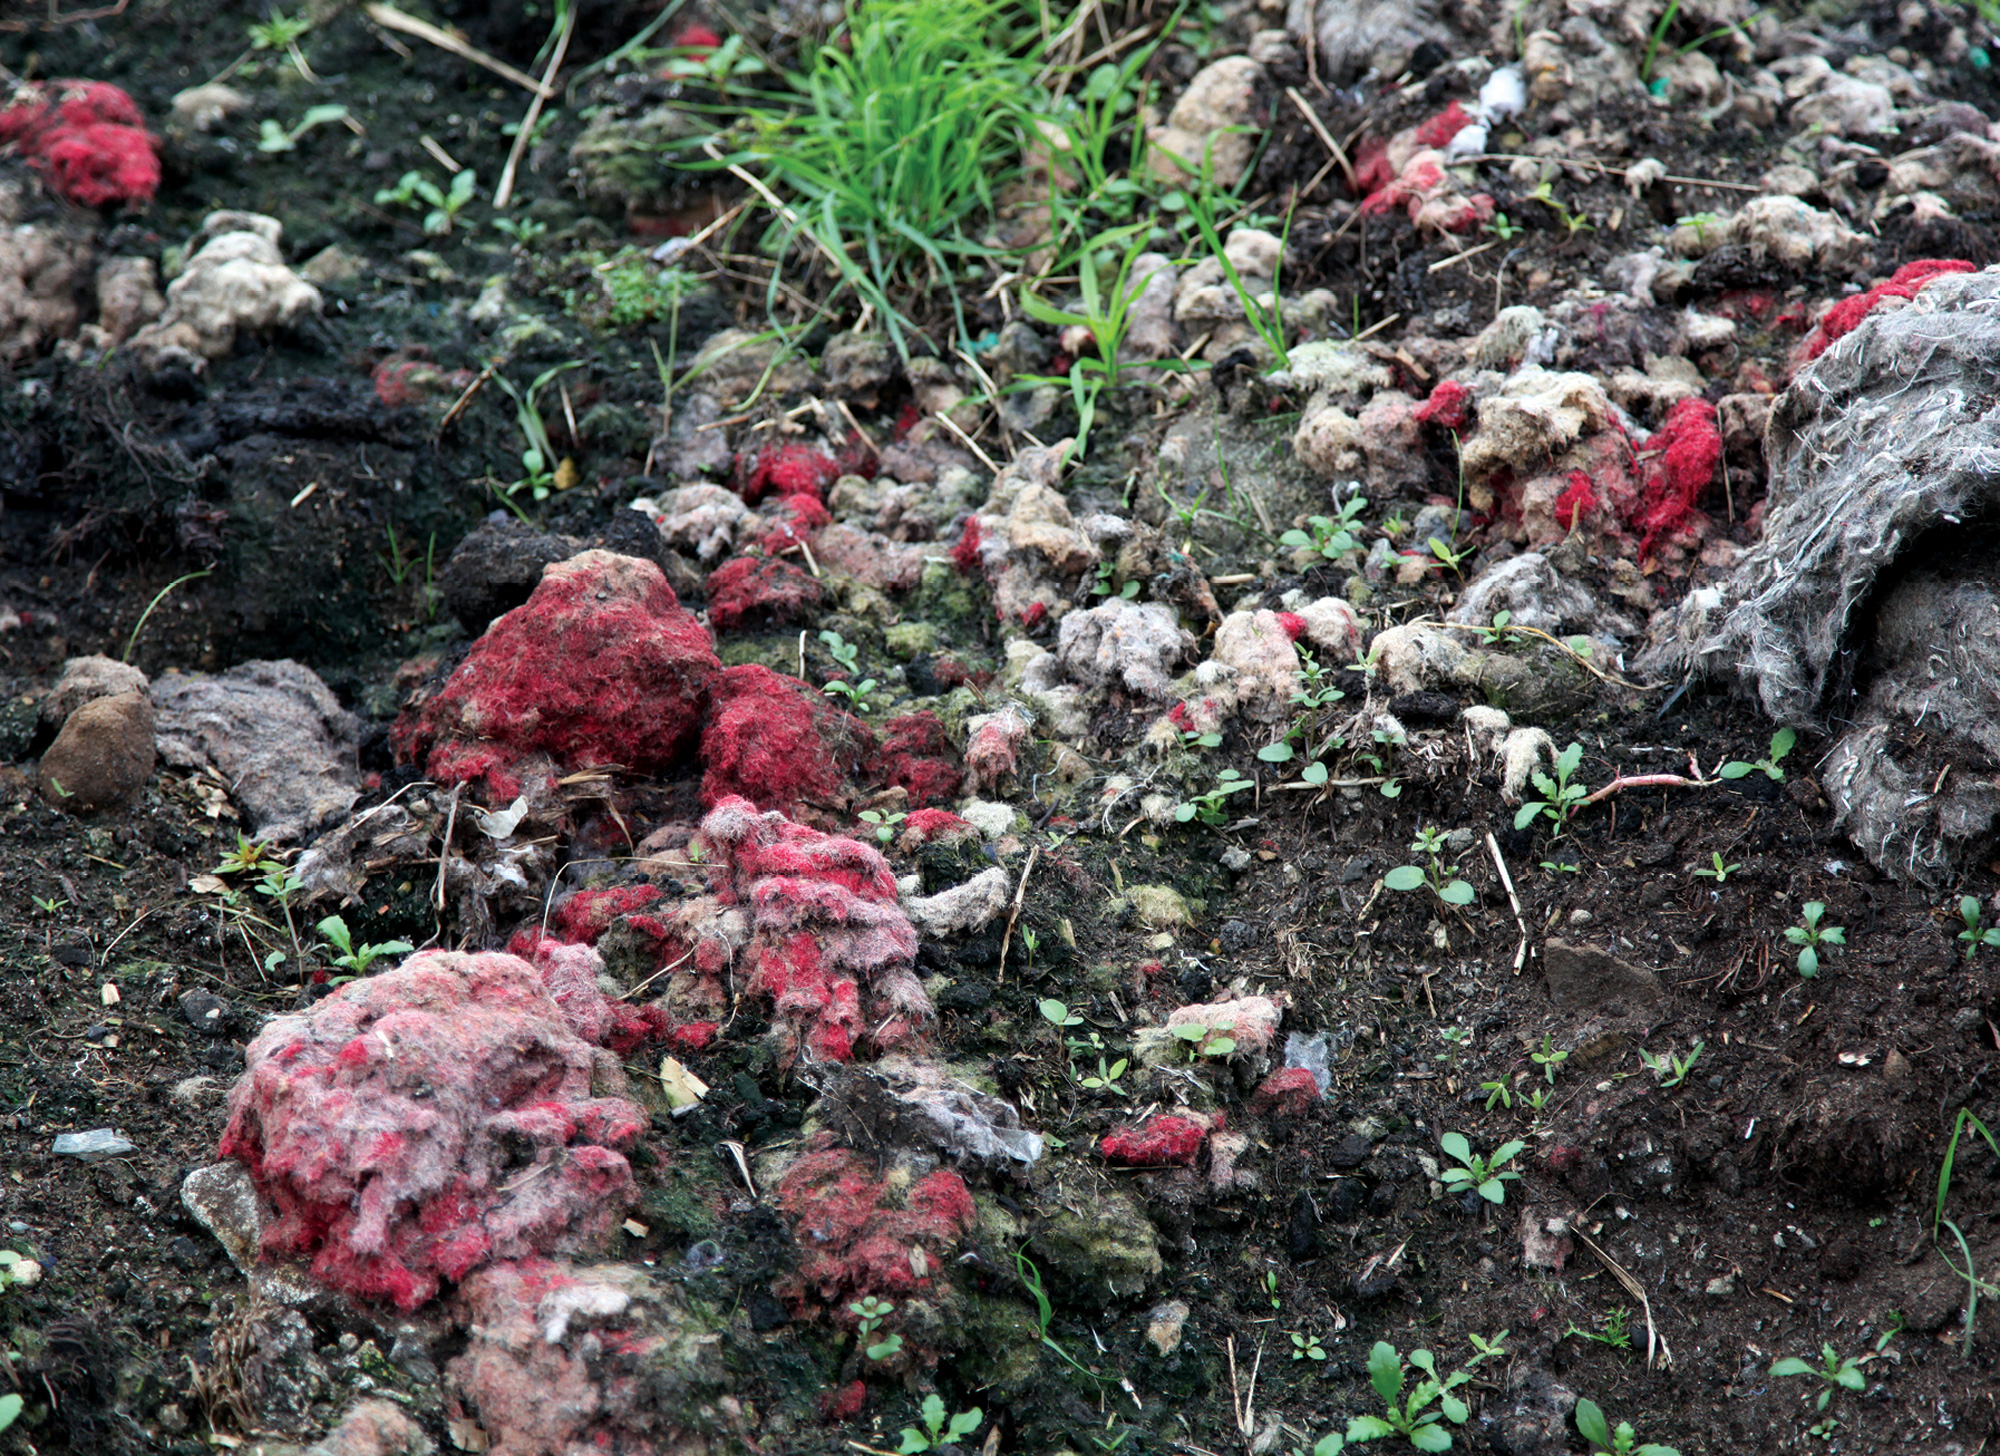 A close-up photograph of a heap of shoddy wool in the Heavy Woollen District of West Yorkshire. The red color in some of the wool comes from identification marks that local farmers make on their sheep. The red wool is separated and dumped before the rest of the wool is processed.